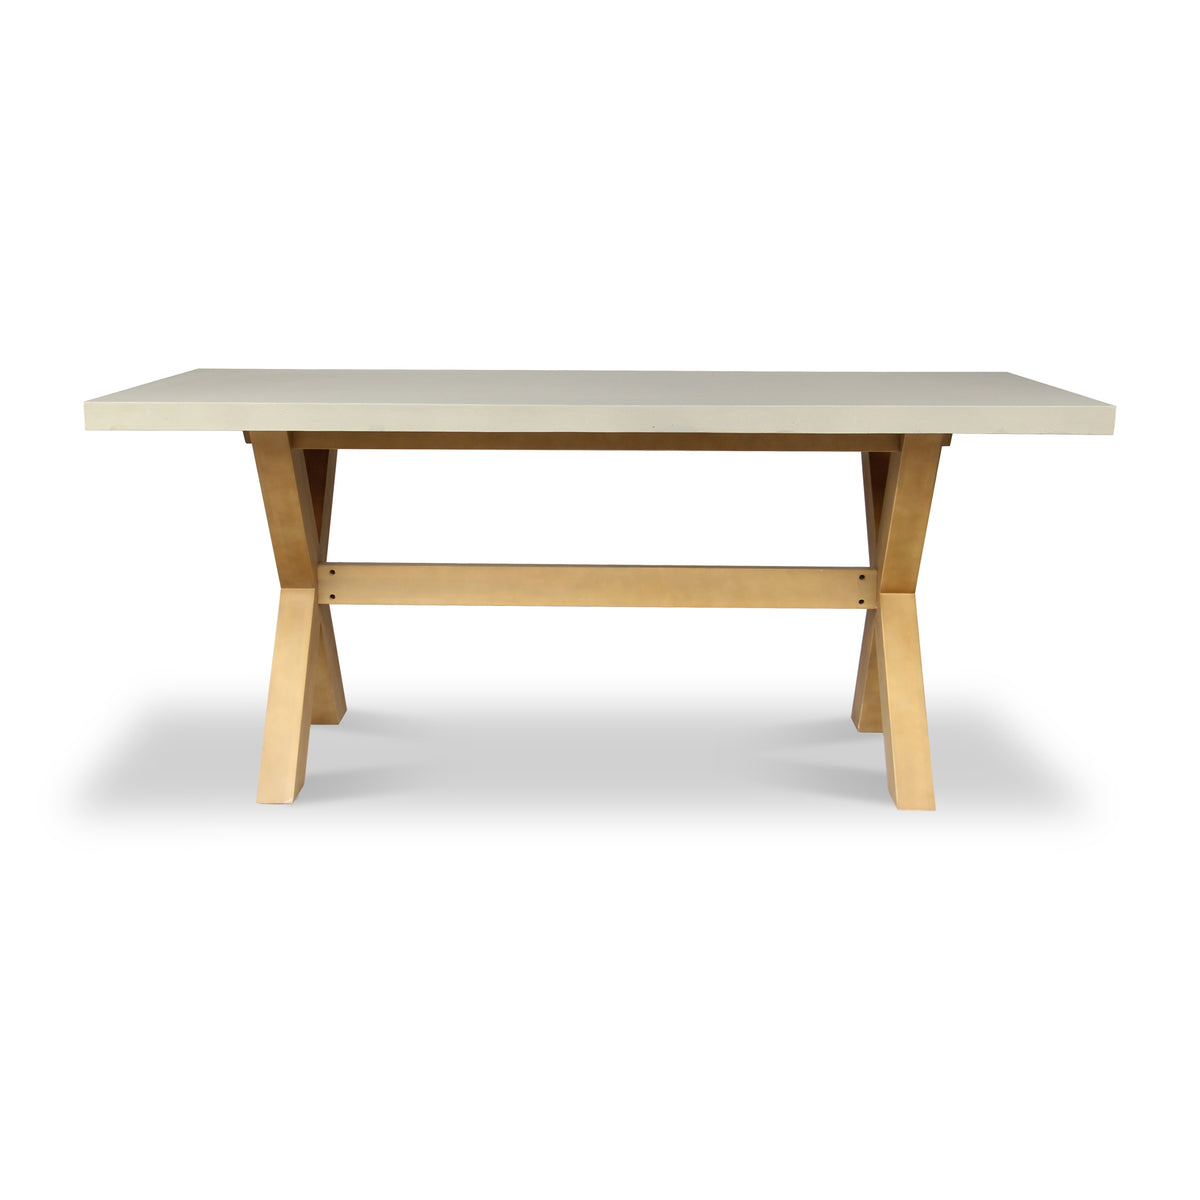 Luna 180x90cm Rectangular Concrete Table and Bench Set from Roseland Furniture